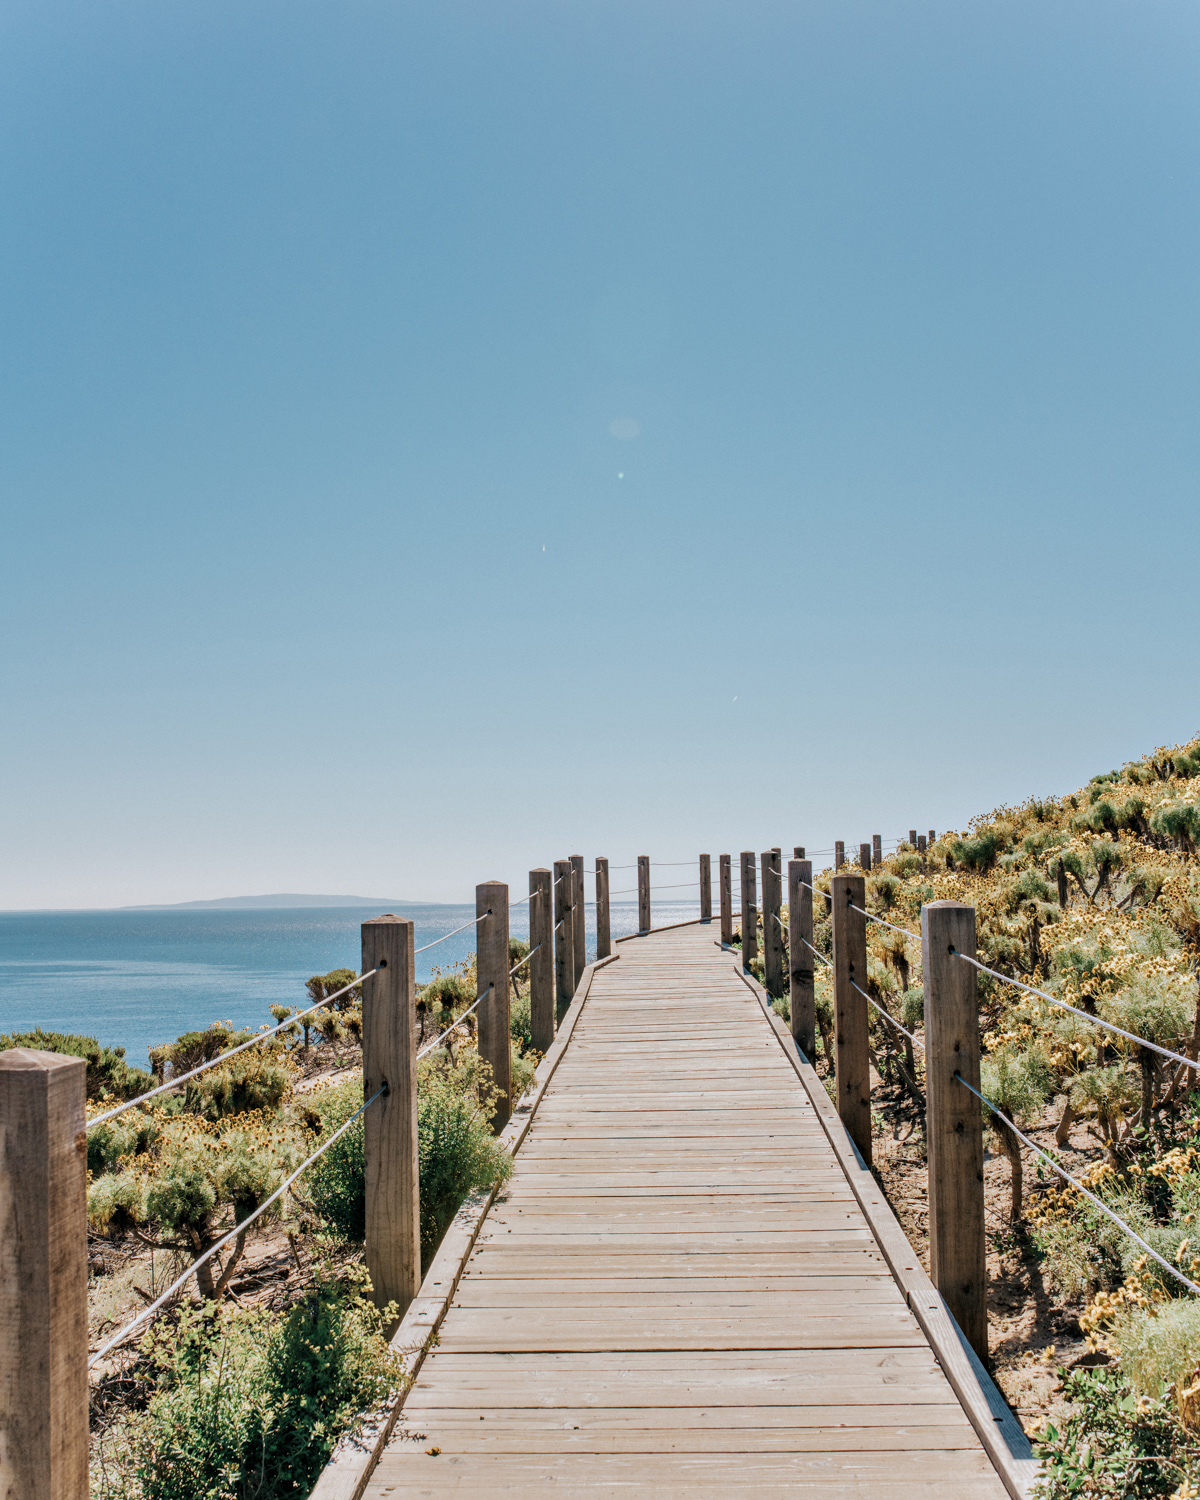 Narrow wooden boardwalk rounding a corner in the distance with the ocean beyond 